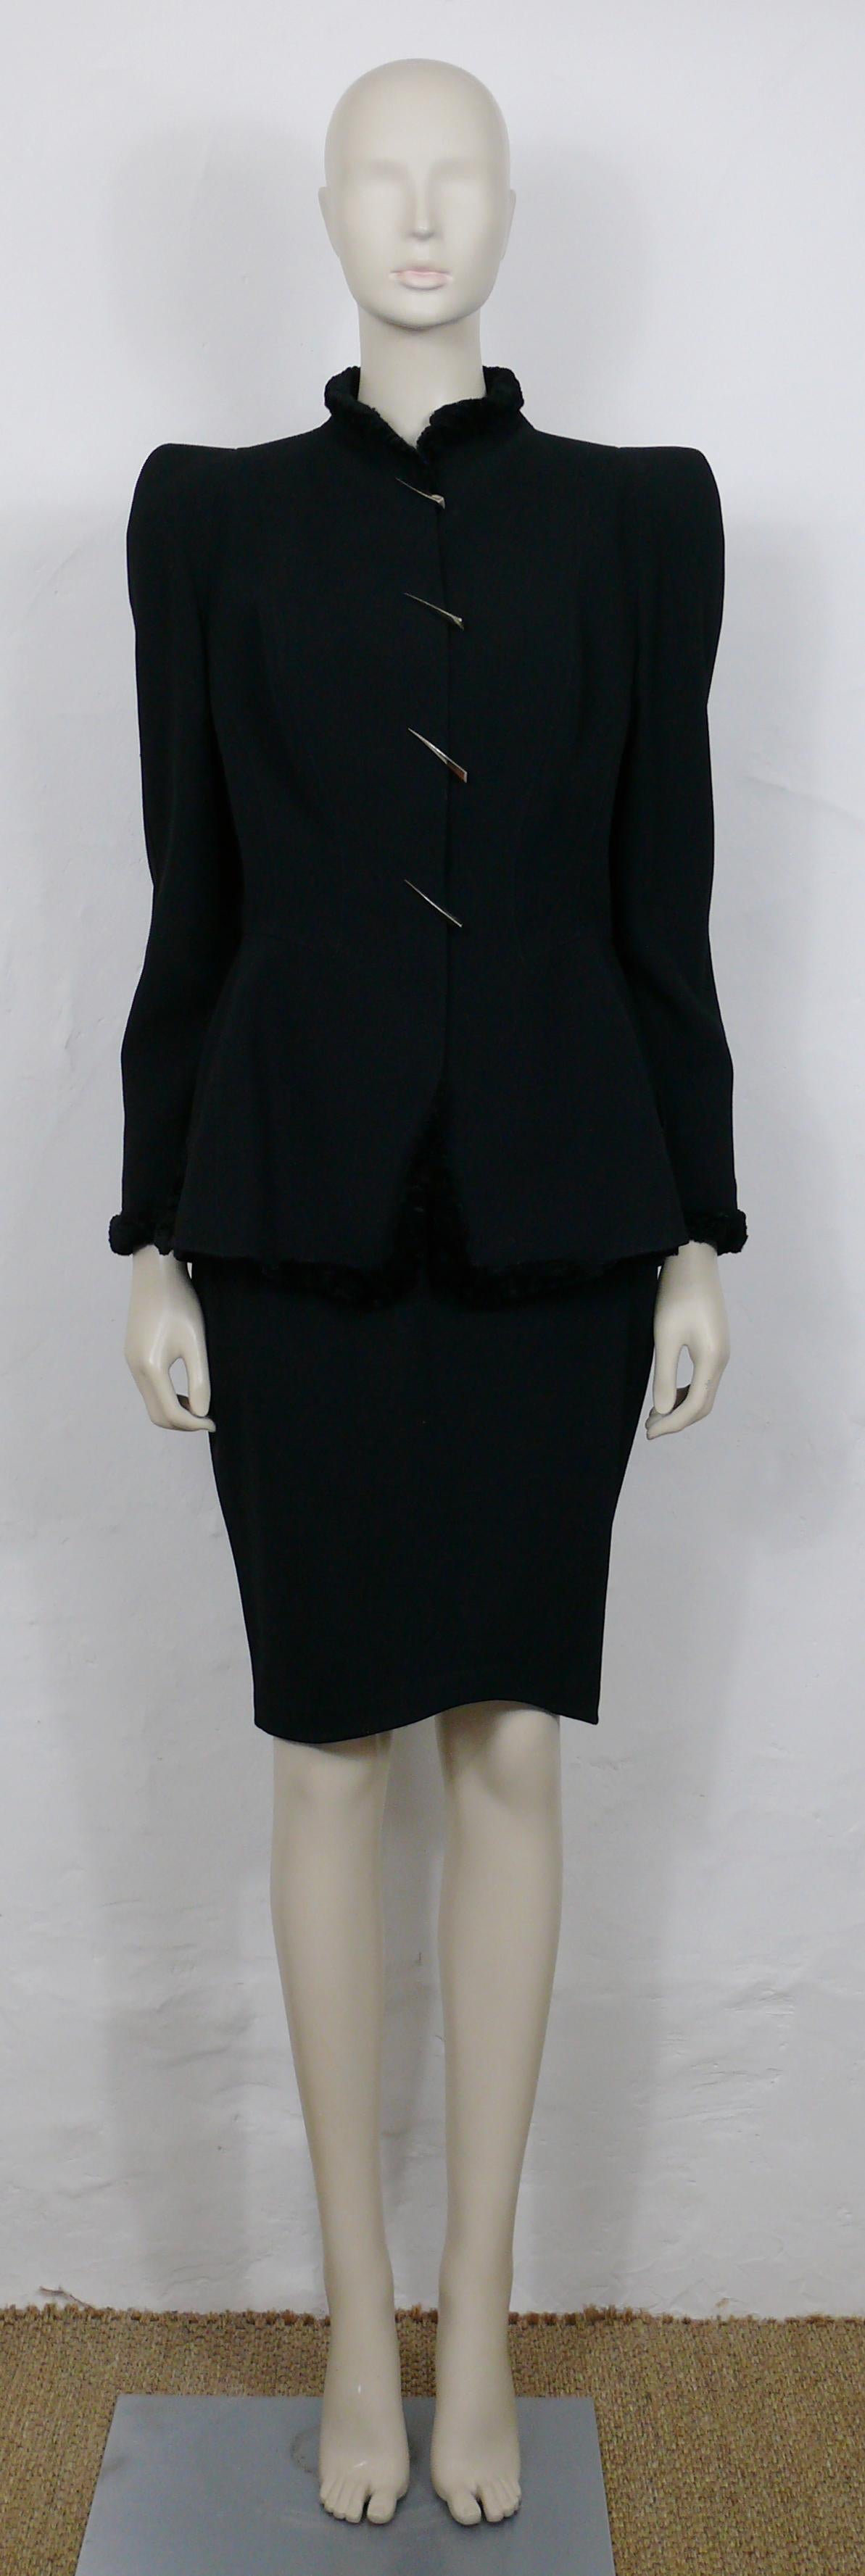 Women's Thierry Mugler Vintage Black Wool & Claw Ornaments Skirt Suit For Sale